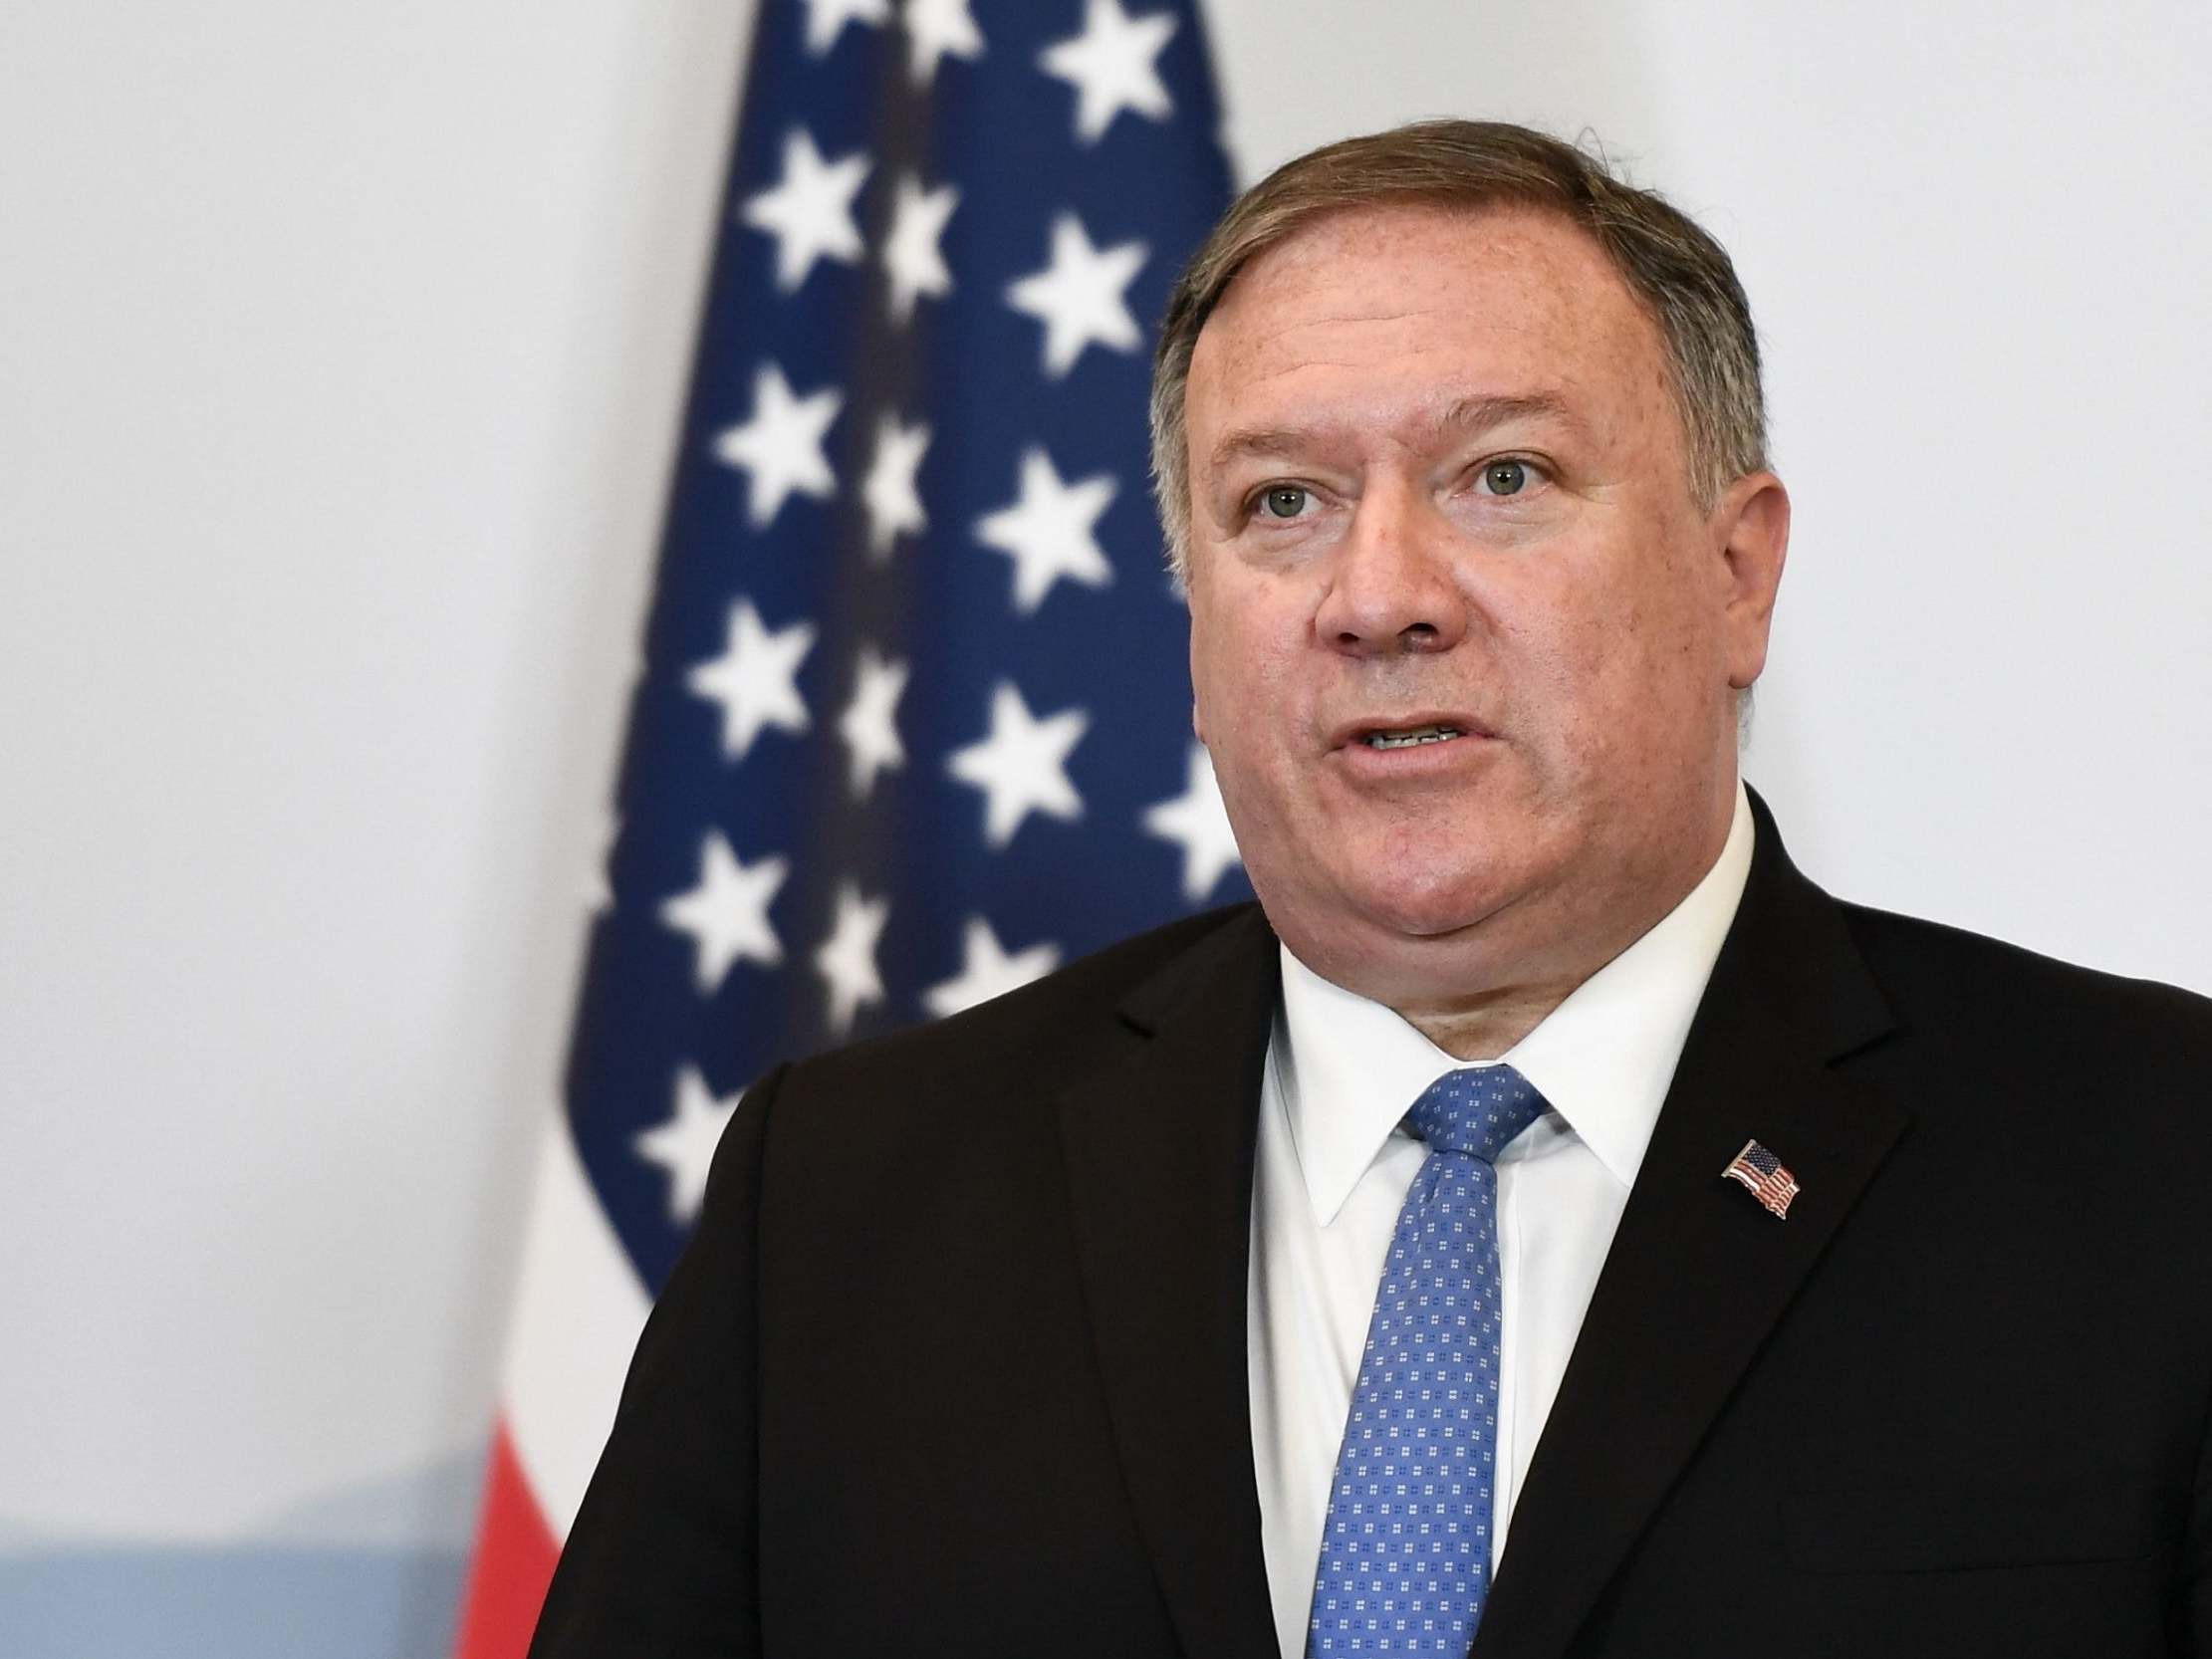 Mike Pompeo has previously opposed same-sex marriage but promised to defend LGBT rights as secretary of state